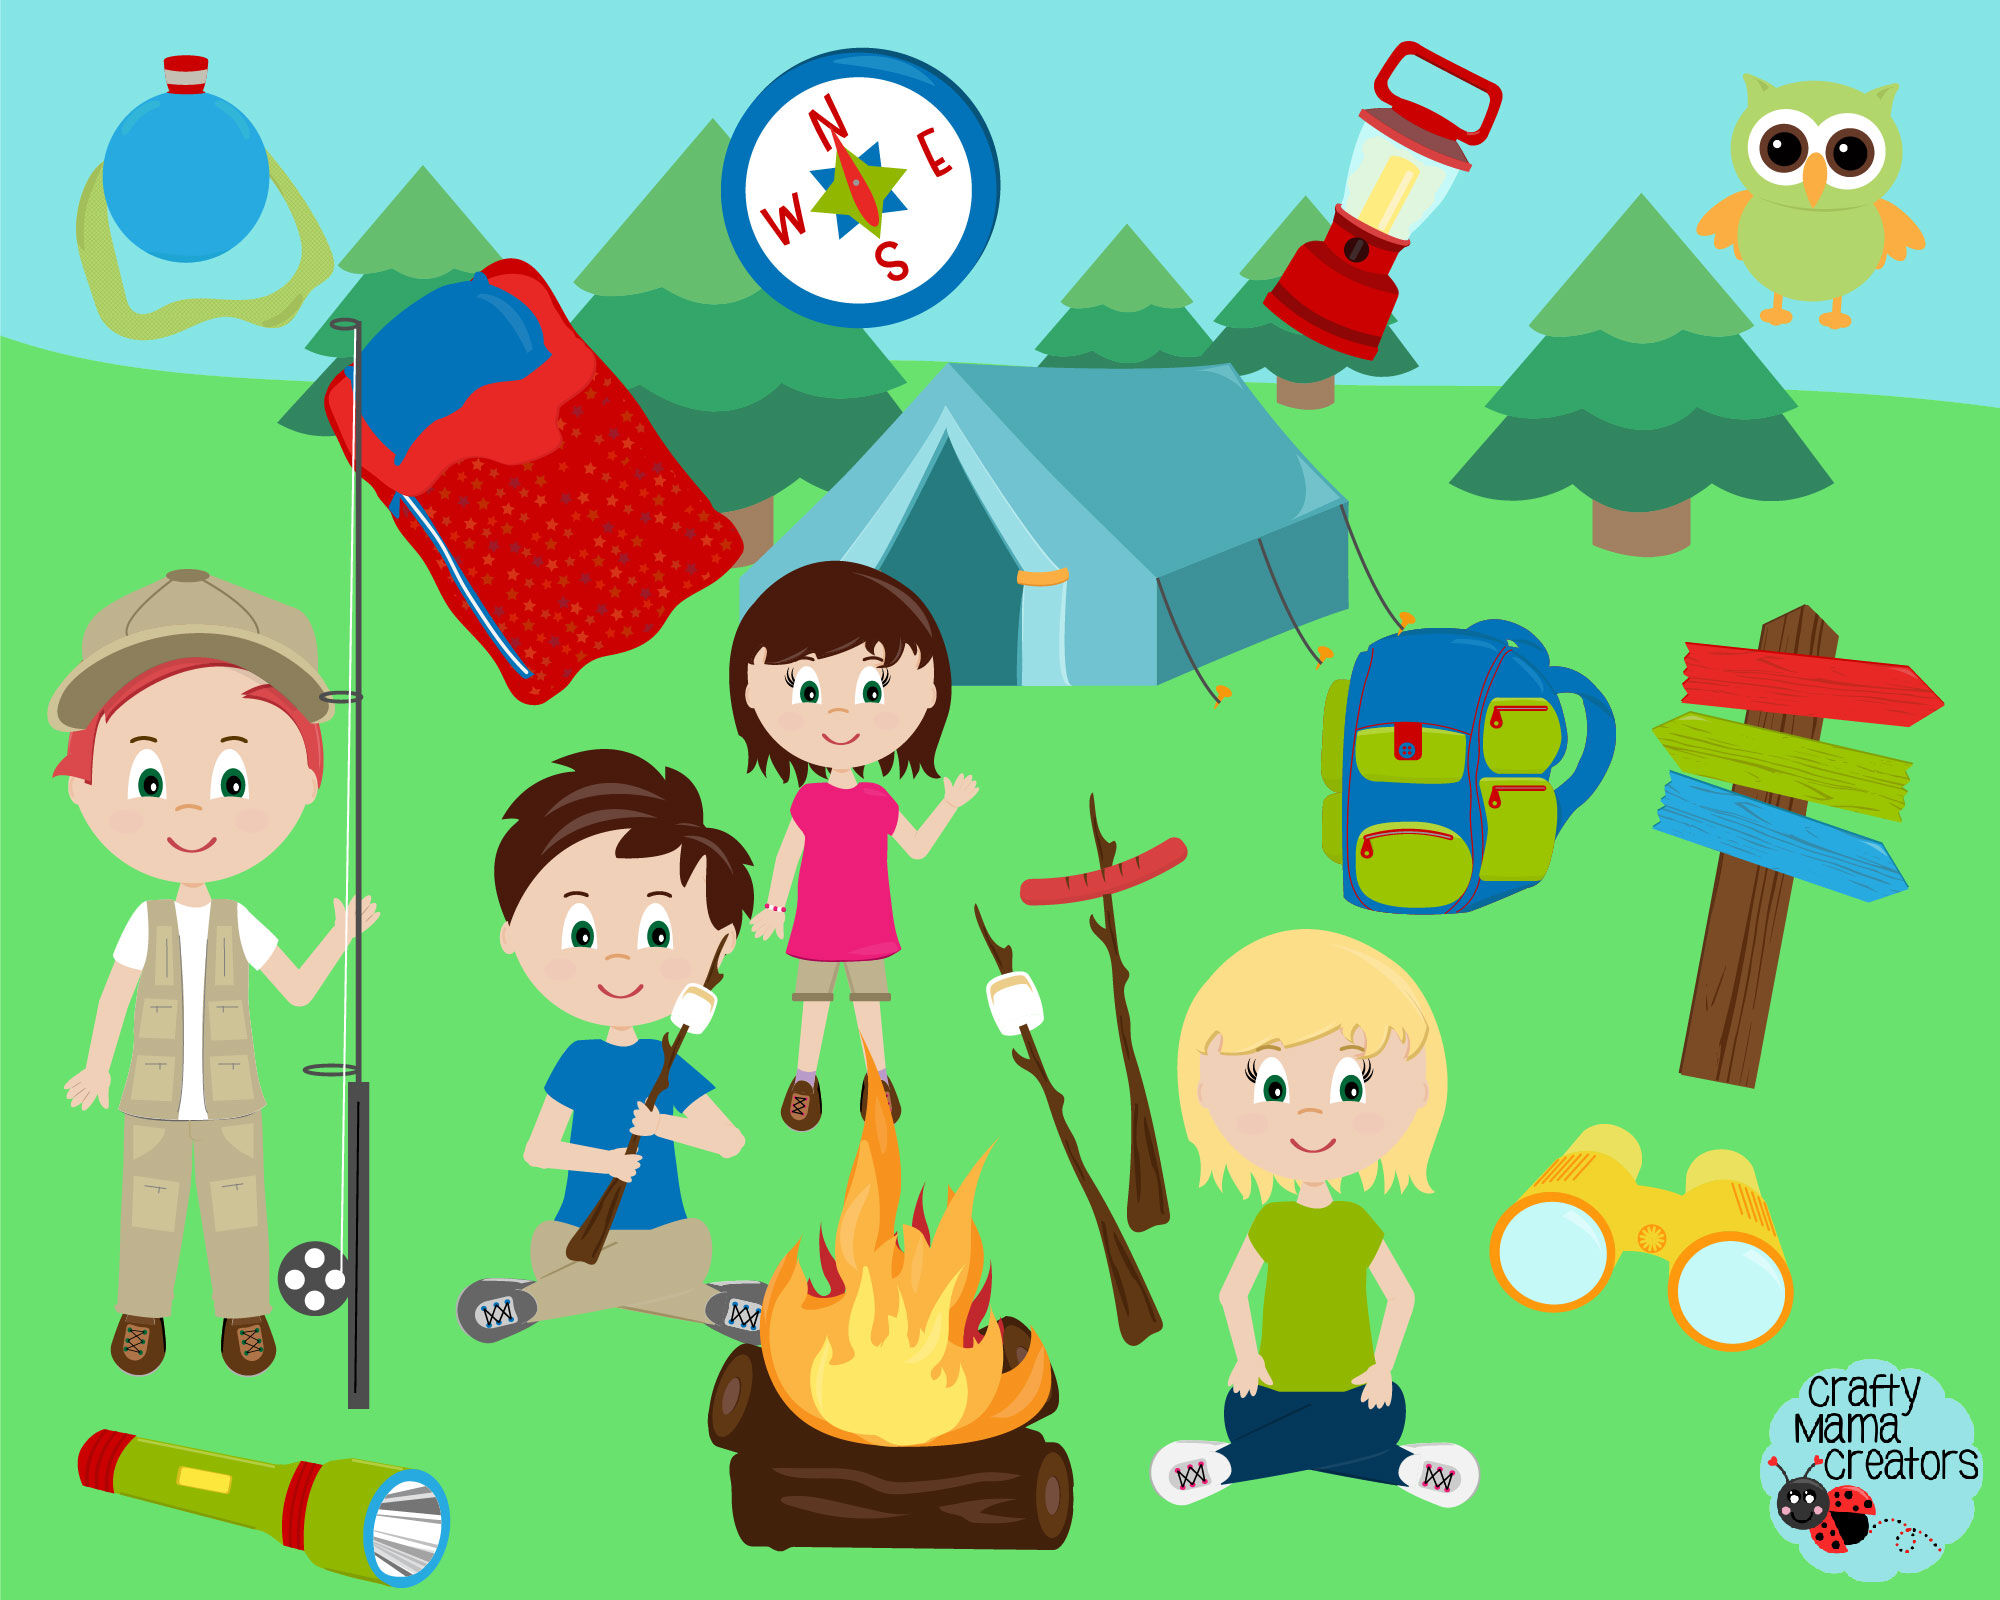 Camping Kids Clip Art, Summer Camp Clipart, Camp Graphics By Crafty